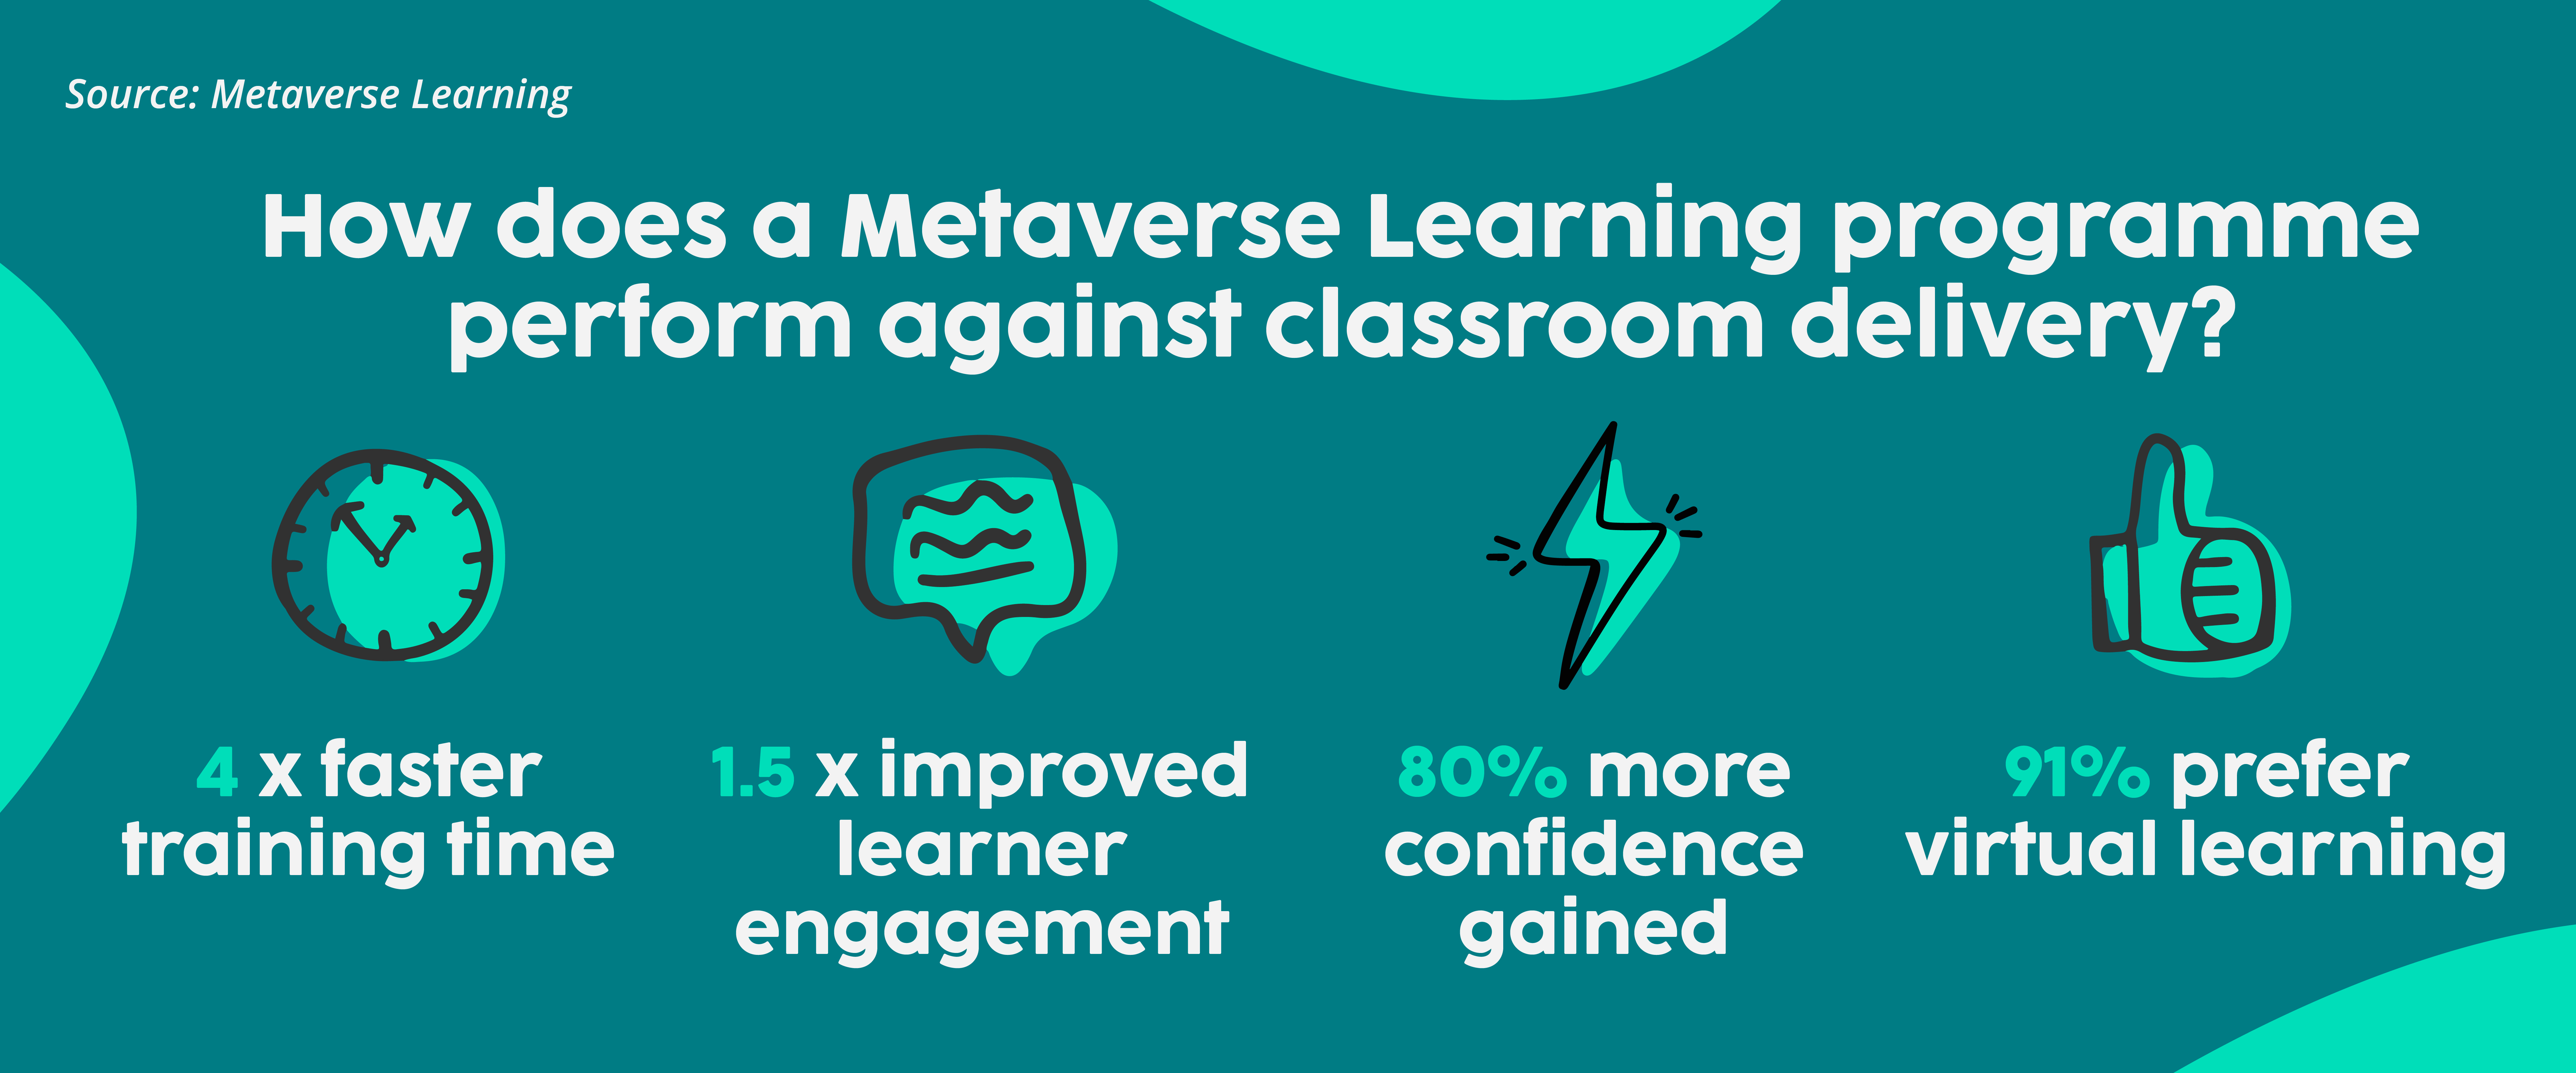 how does Metaverse Learning compare to classroom learner performance?